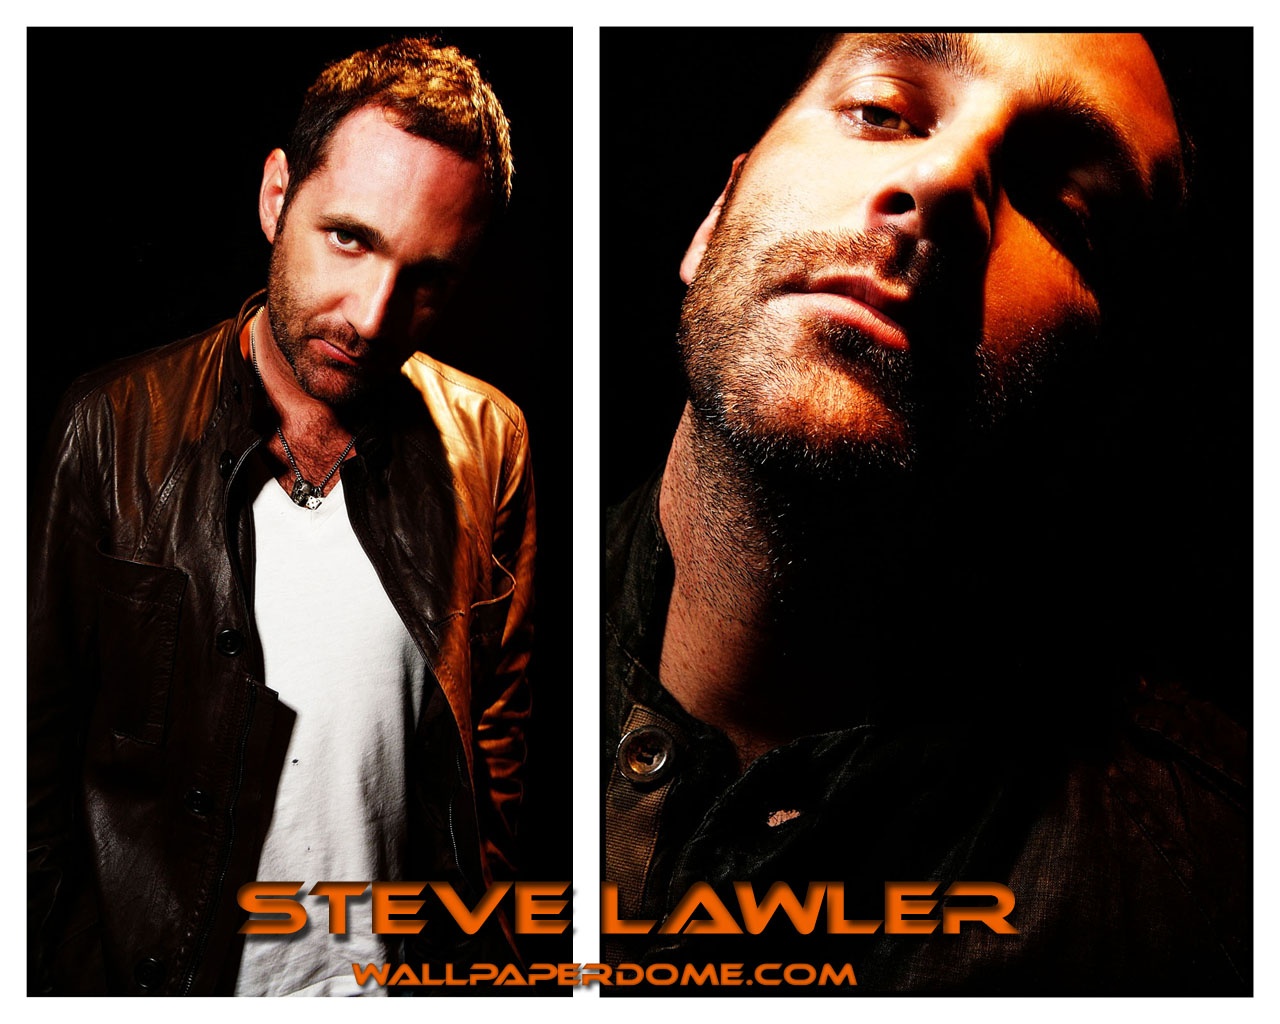 Dj Steve Lawler HD and Wide Wallpapers